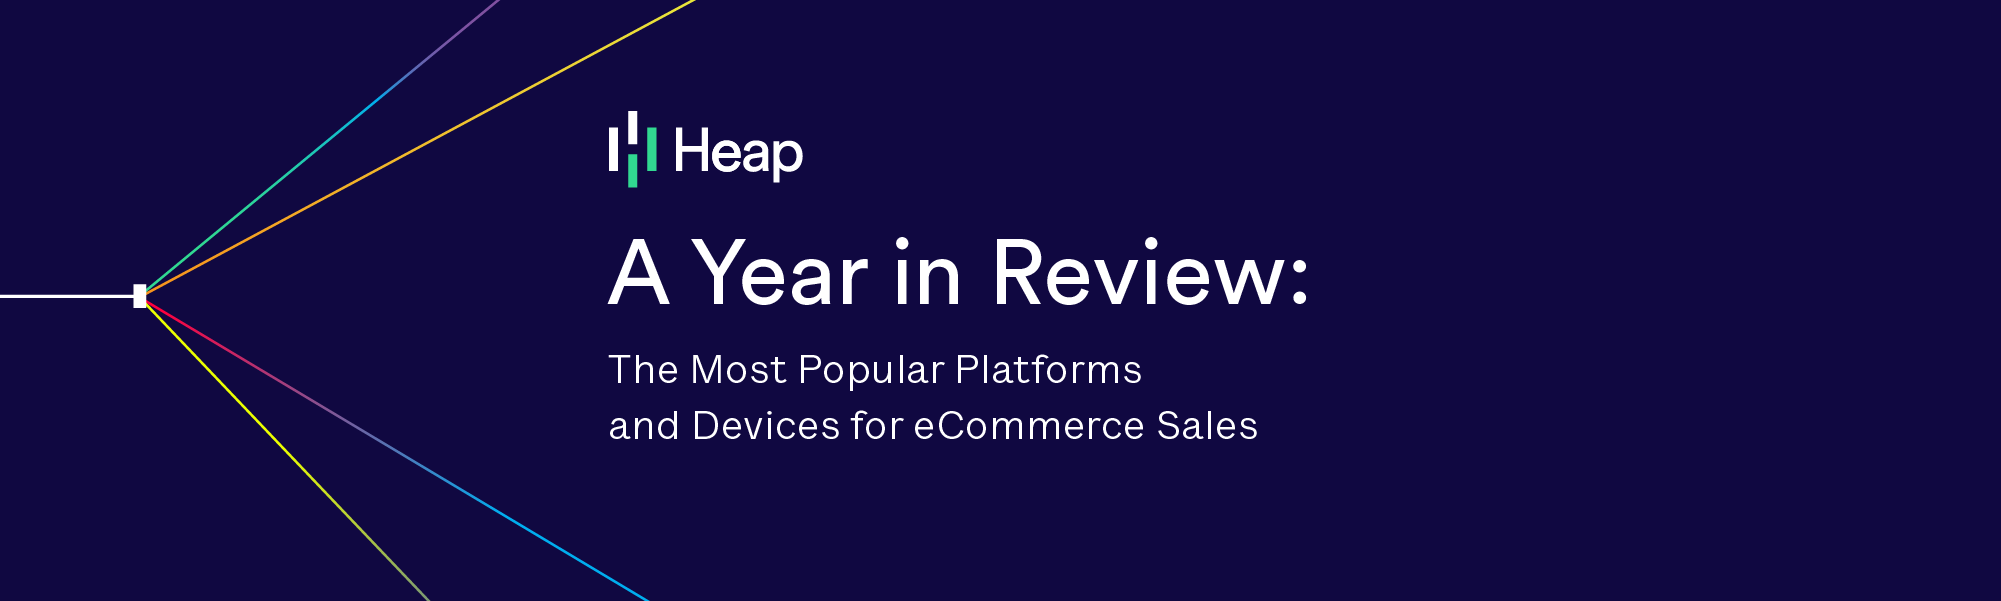 A Year in Review: The Most Popular Platforms and Devices for eCommerce Sales